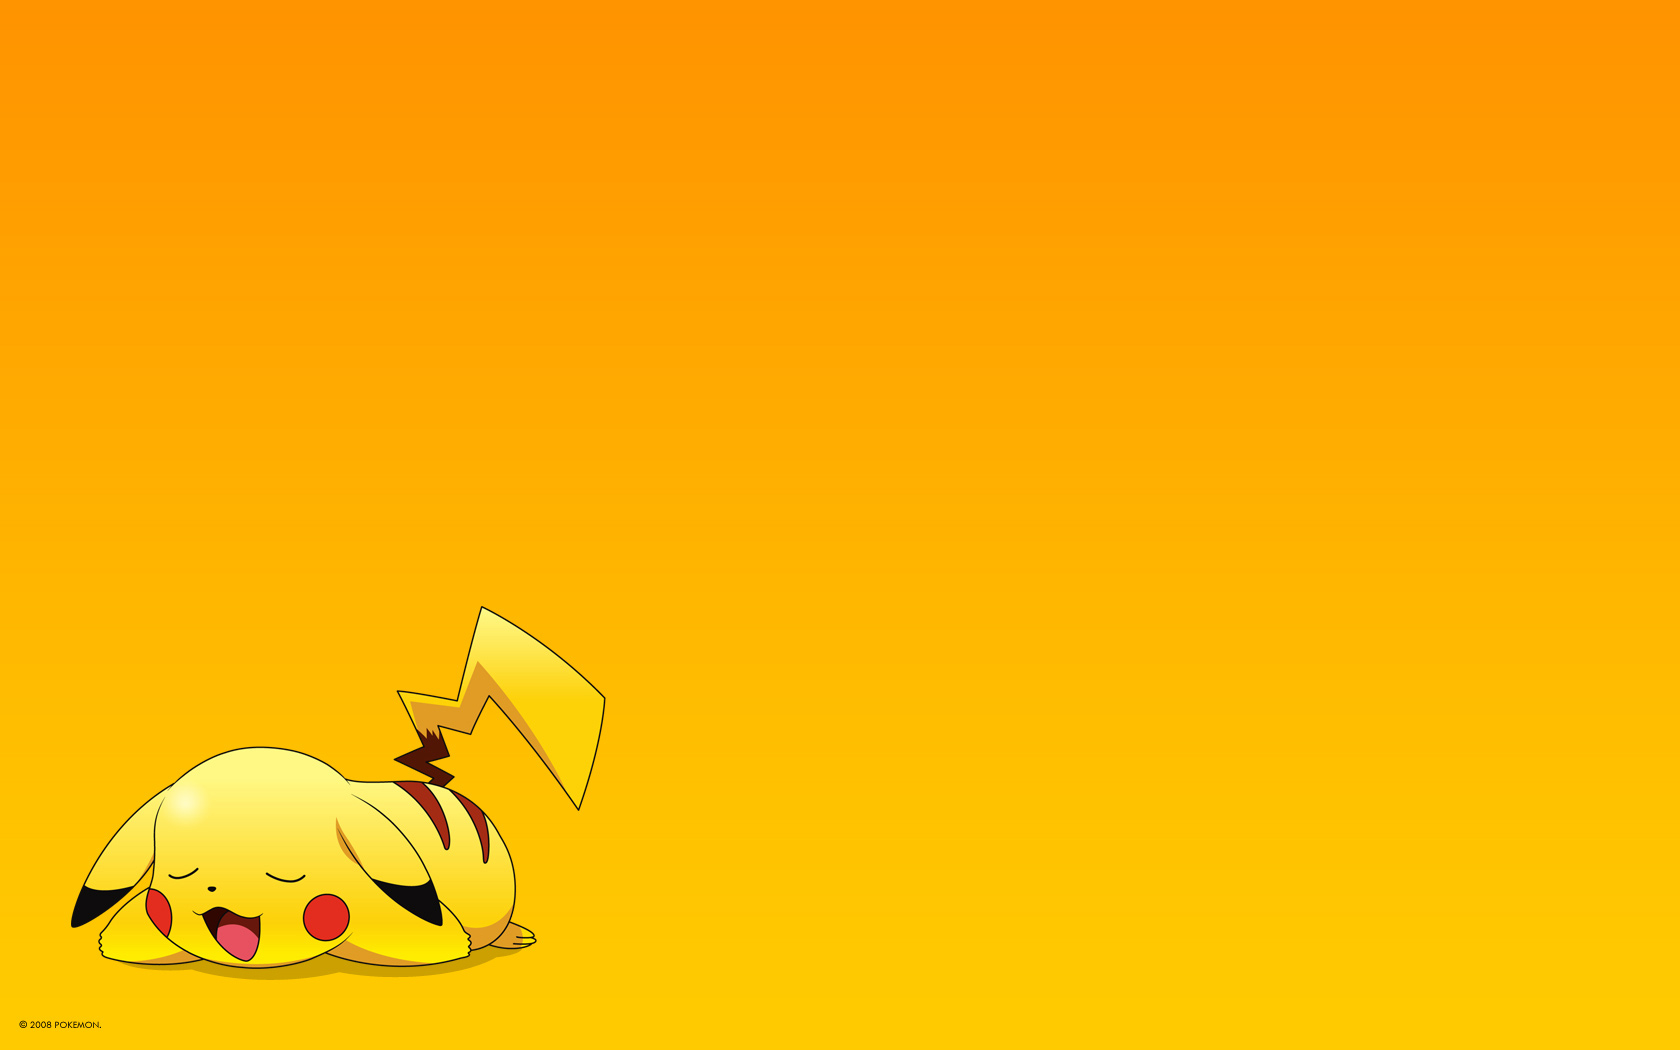 Pikachu images Pikachu Wallpaper HD wallpaper and background photos